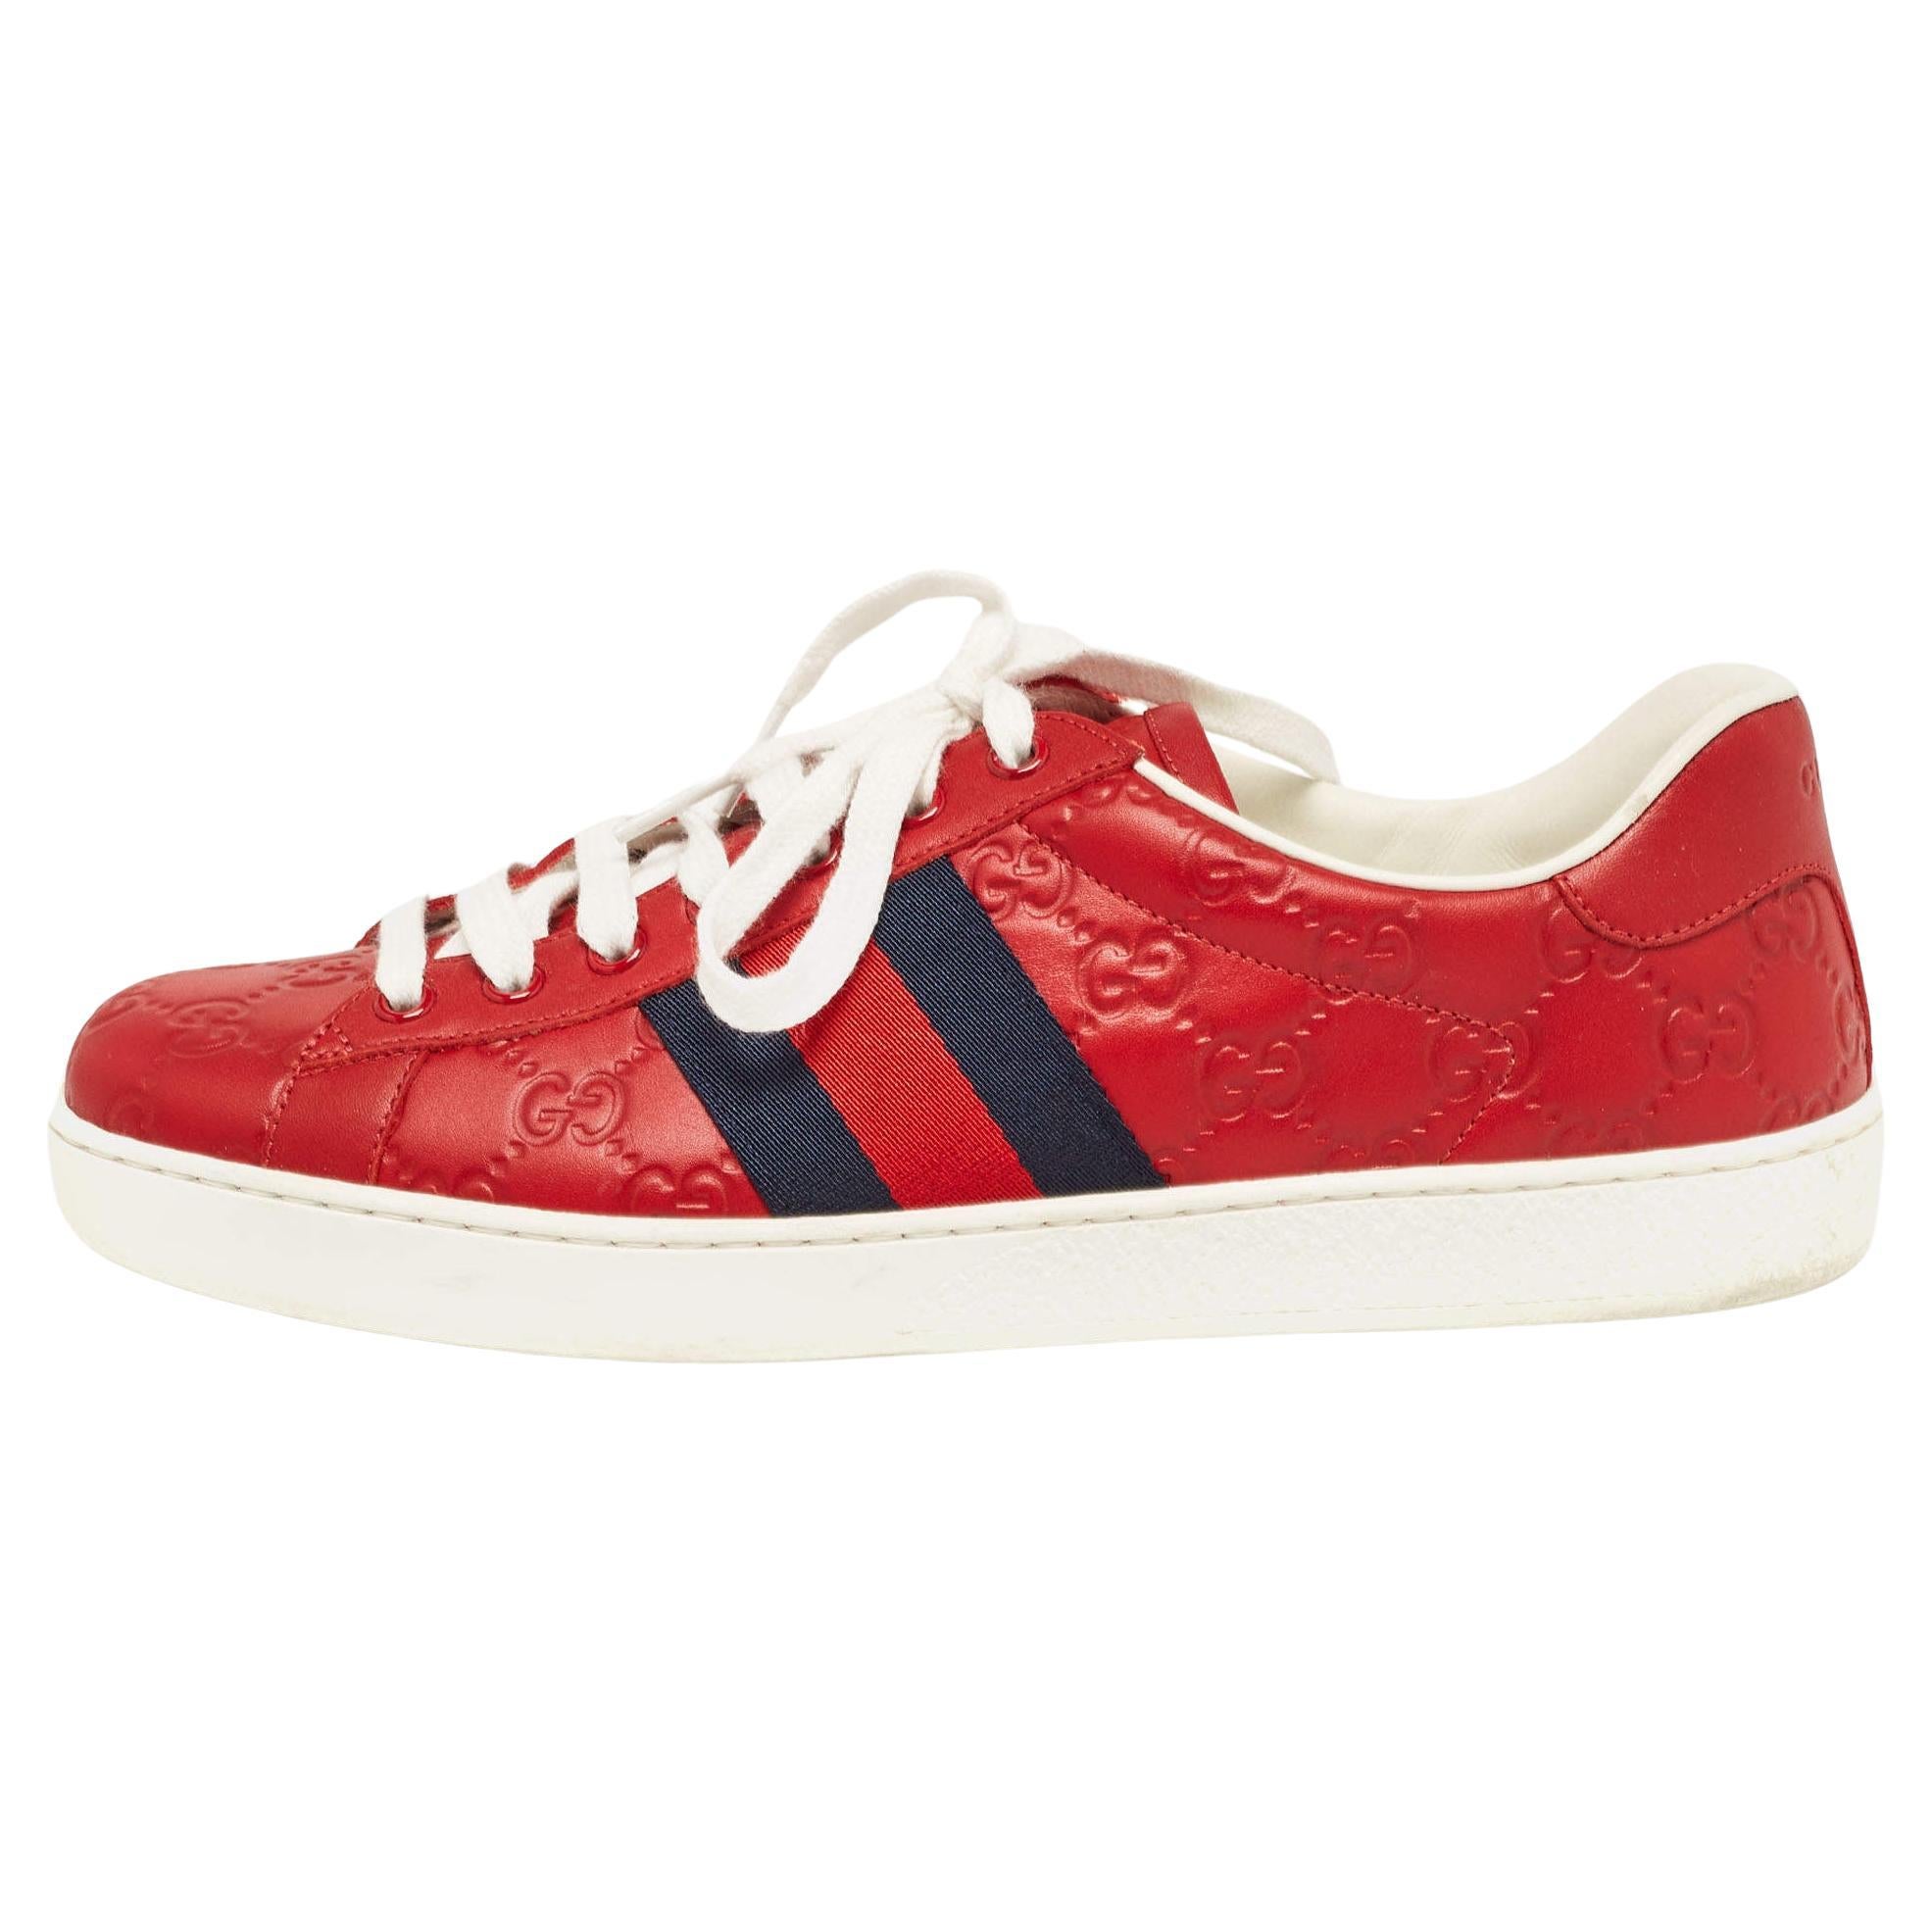 Gucci Red Guccissima Leather Ace Sneakers Size 41.5 For Sale